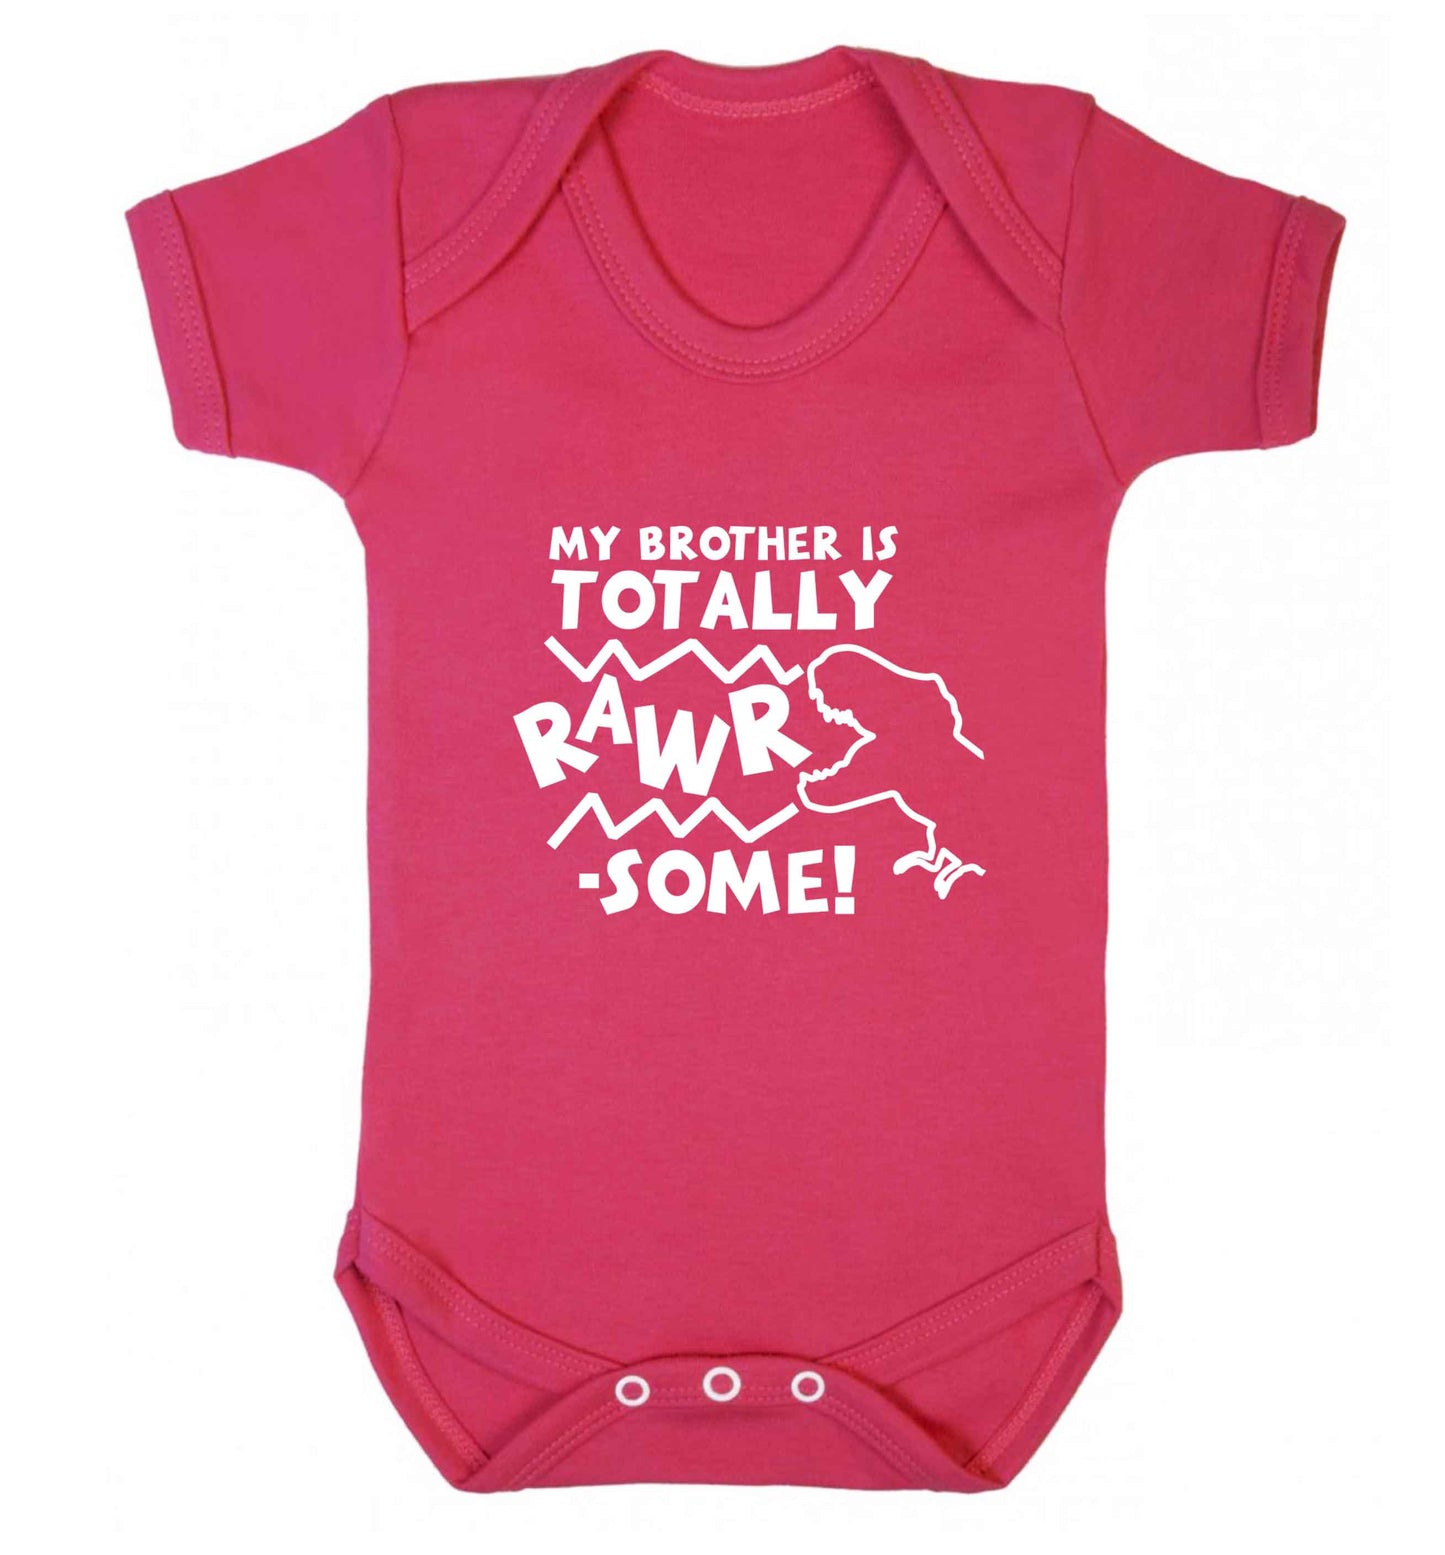 My brother is totally rawrsome baby vest dark pink 18-24 months